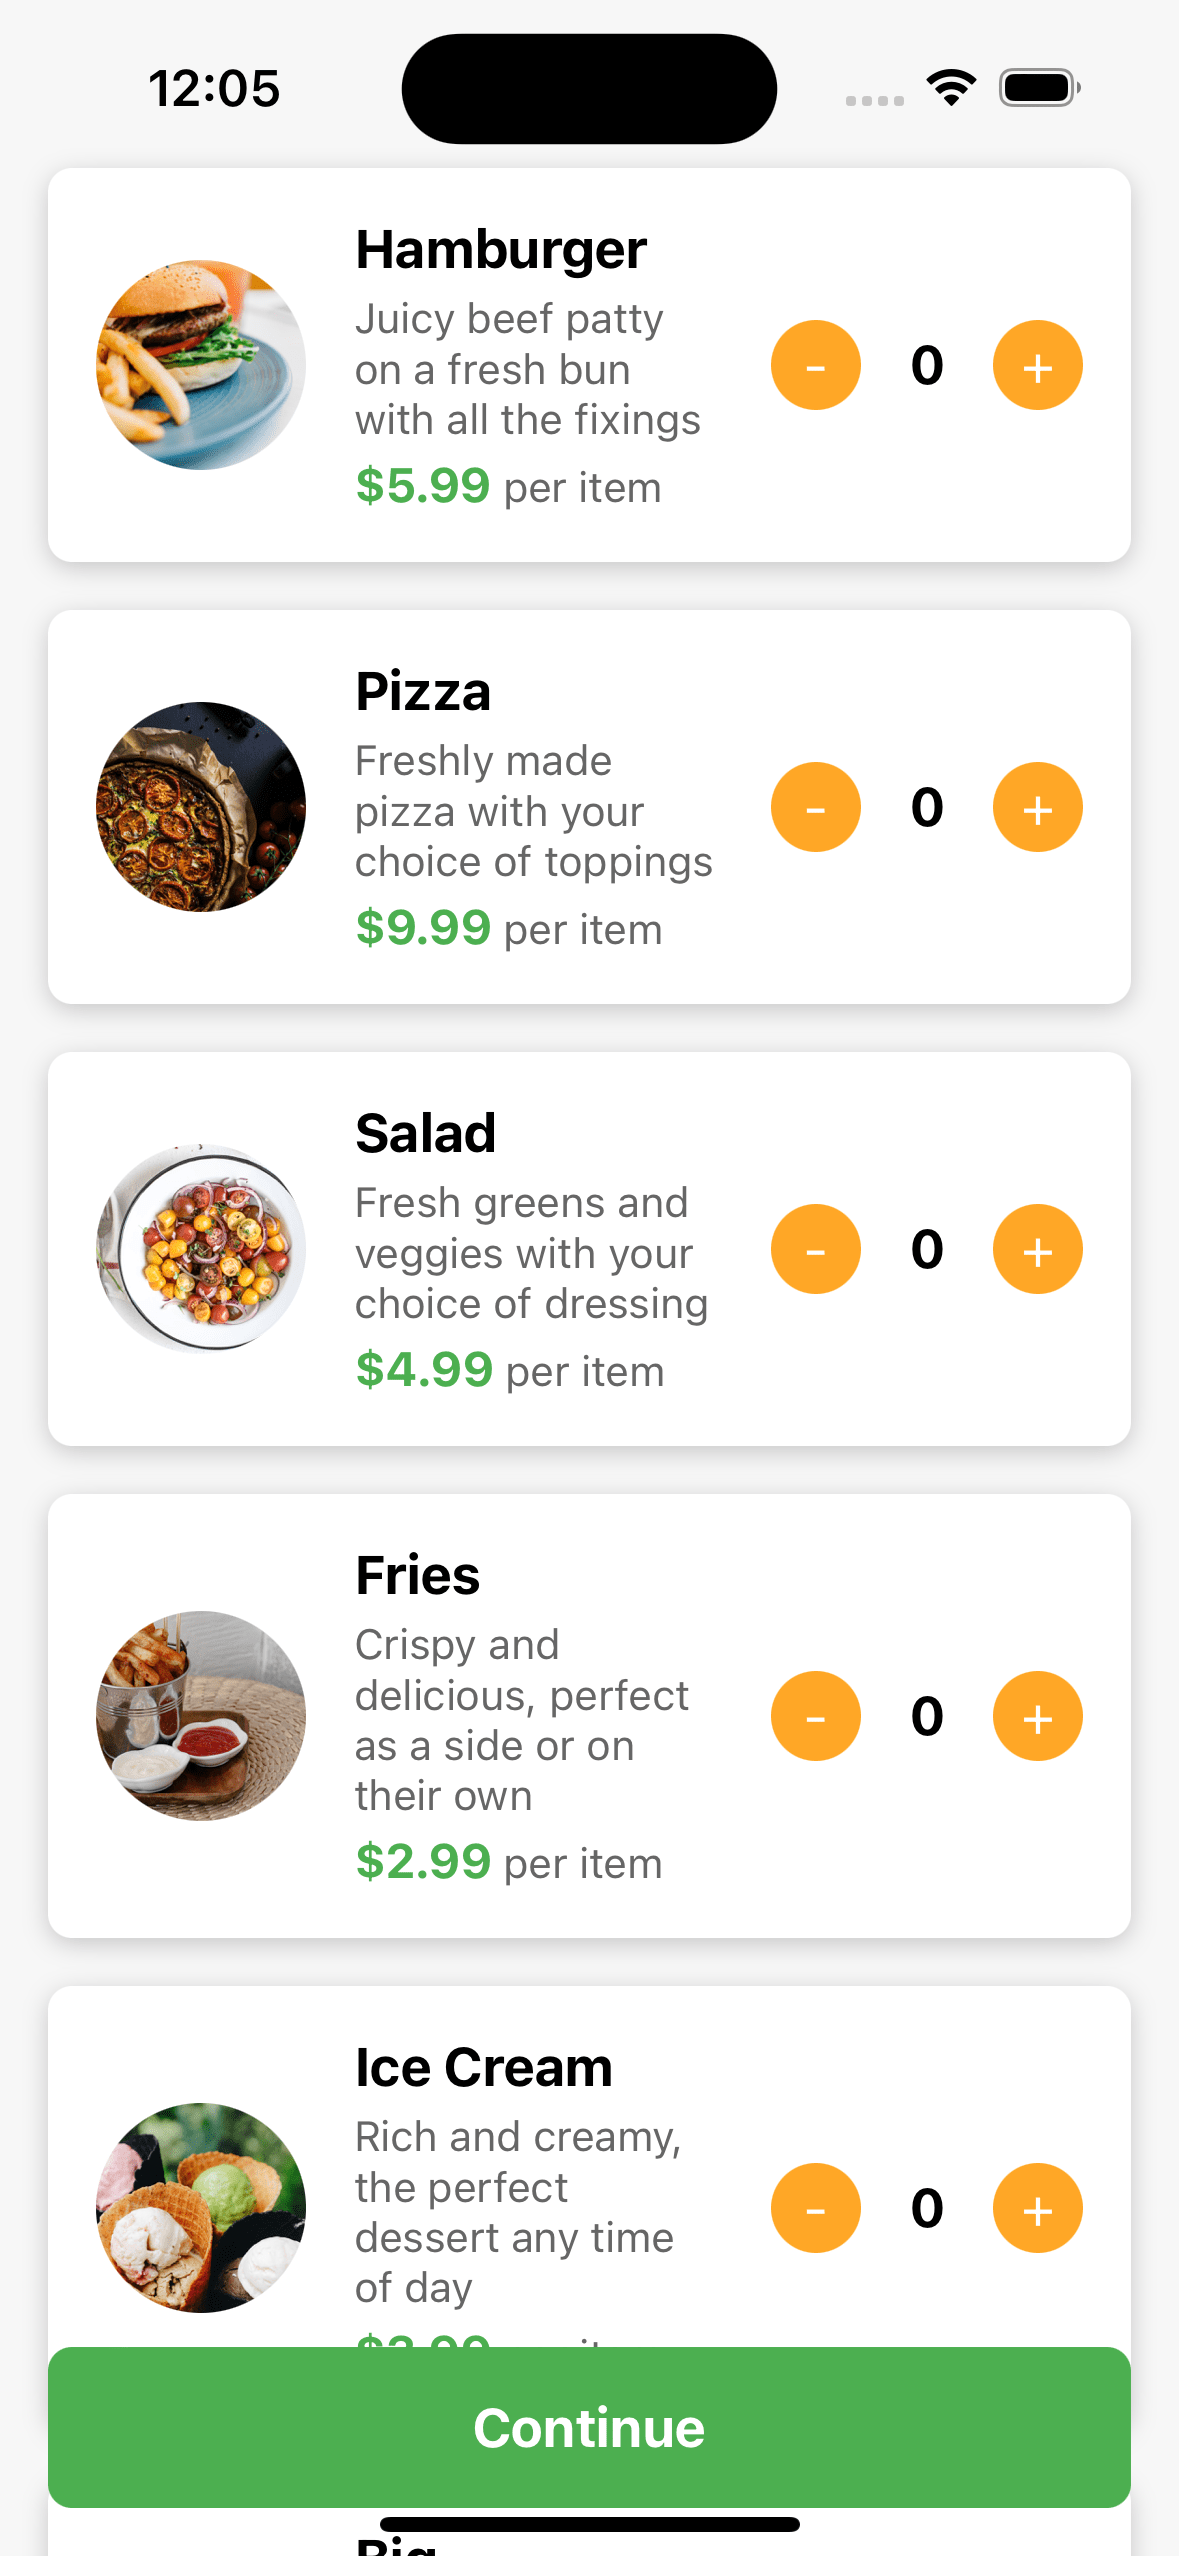 React native template. Restaurant product list with image, name, description, price and action buttons